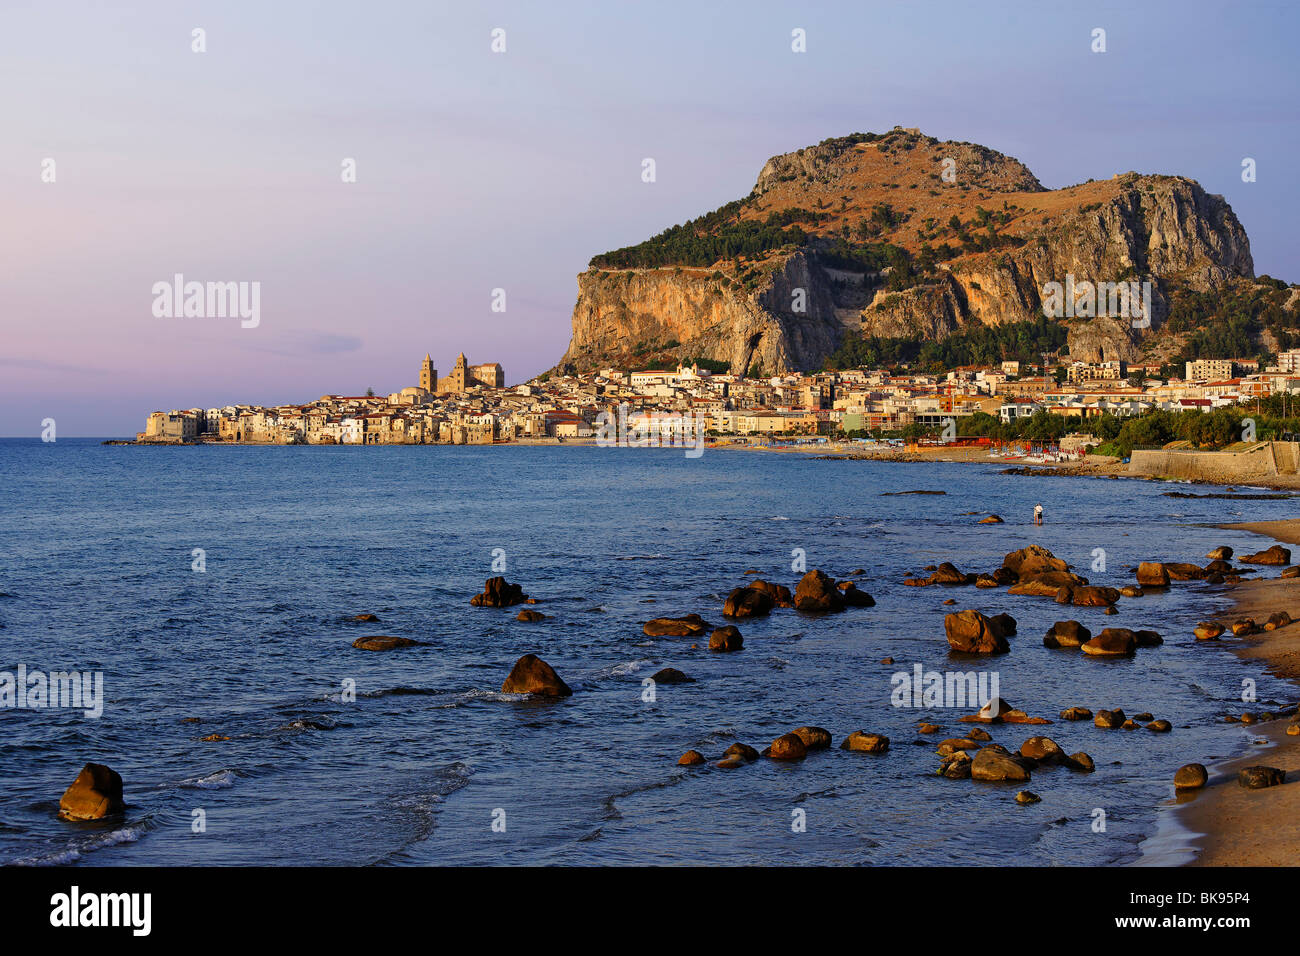 View to Cefalu with Rocca di Cefalu, Cefaly, Sicily, Italy Stock Photo